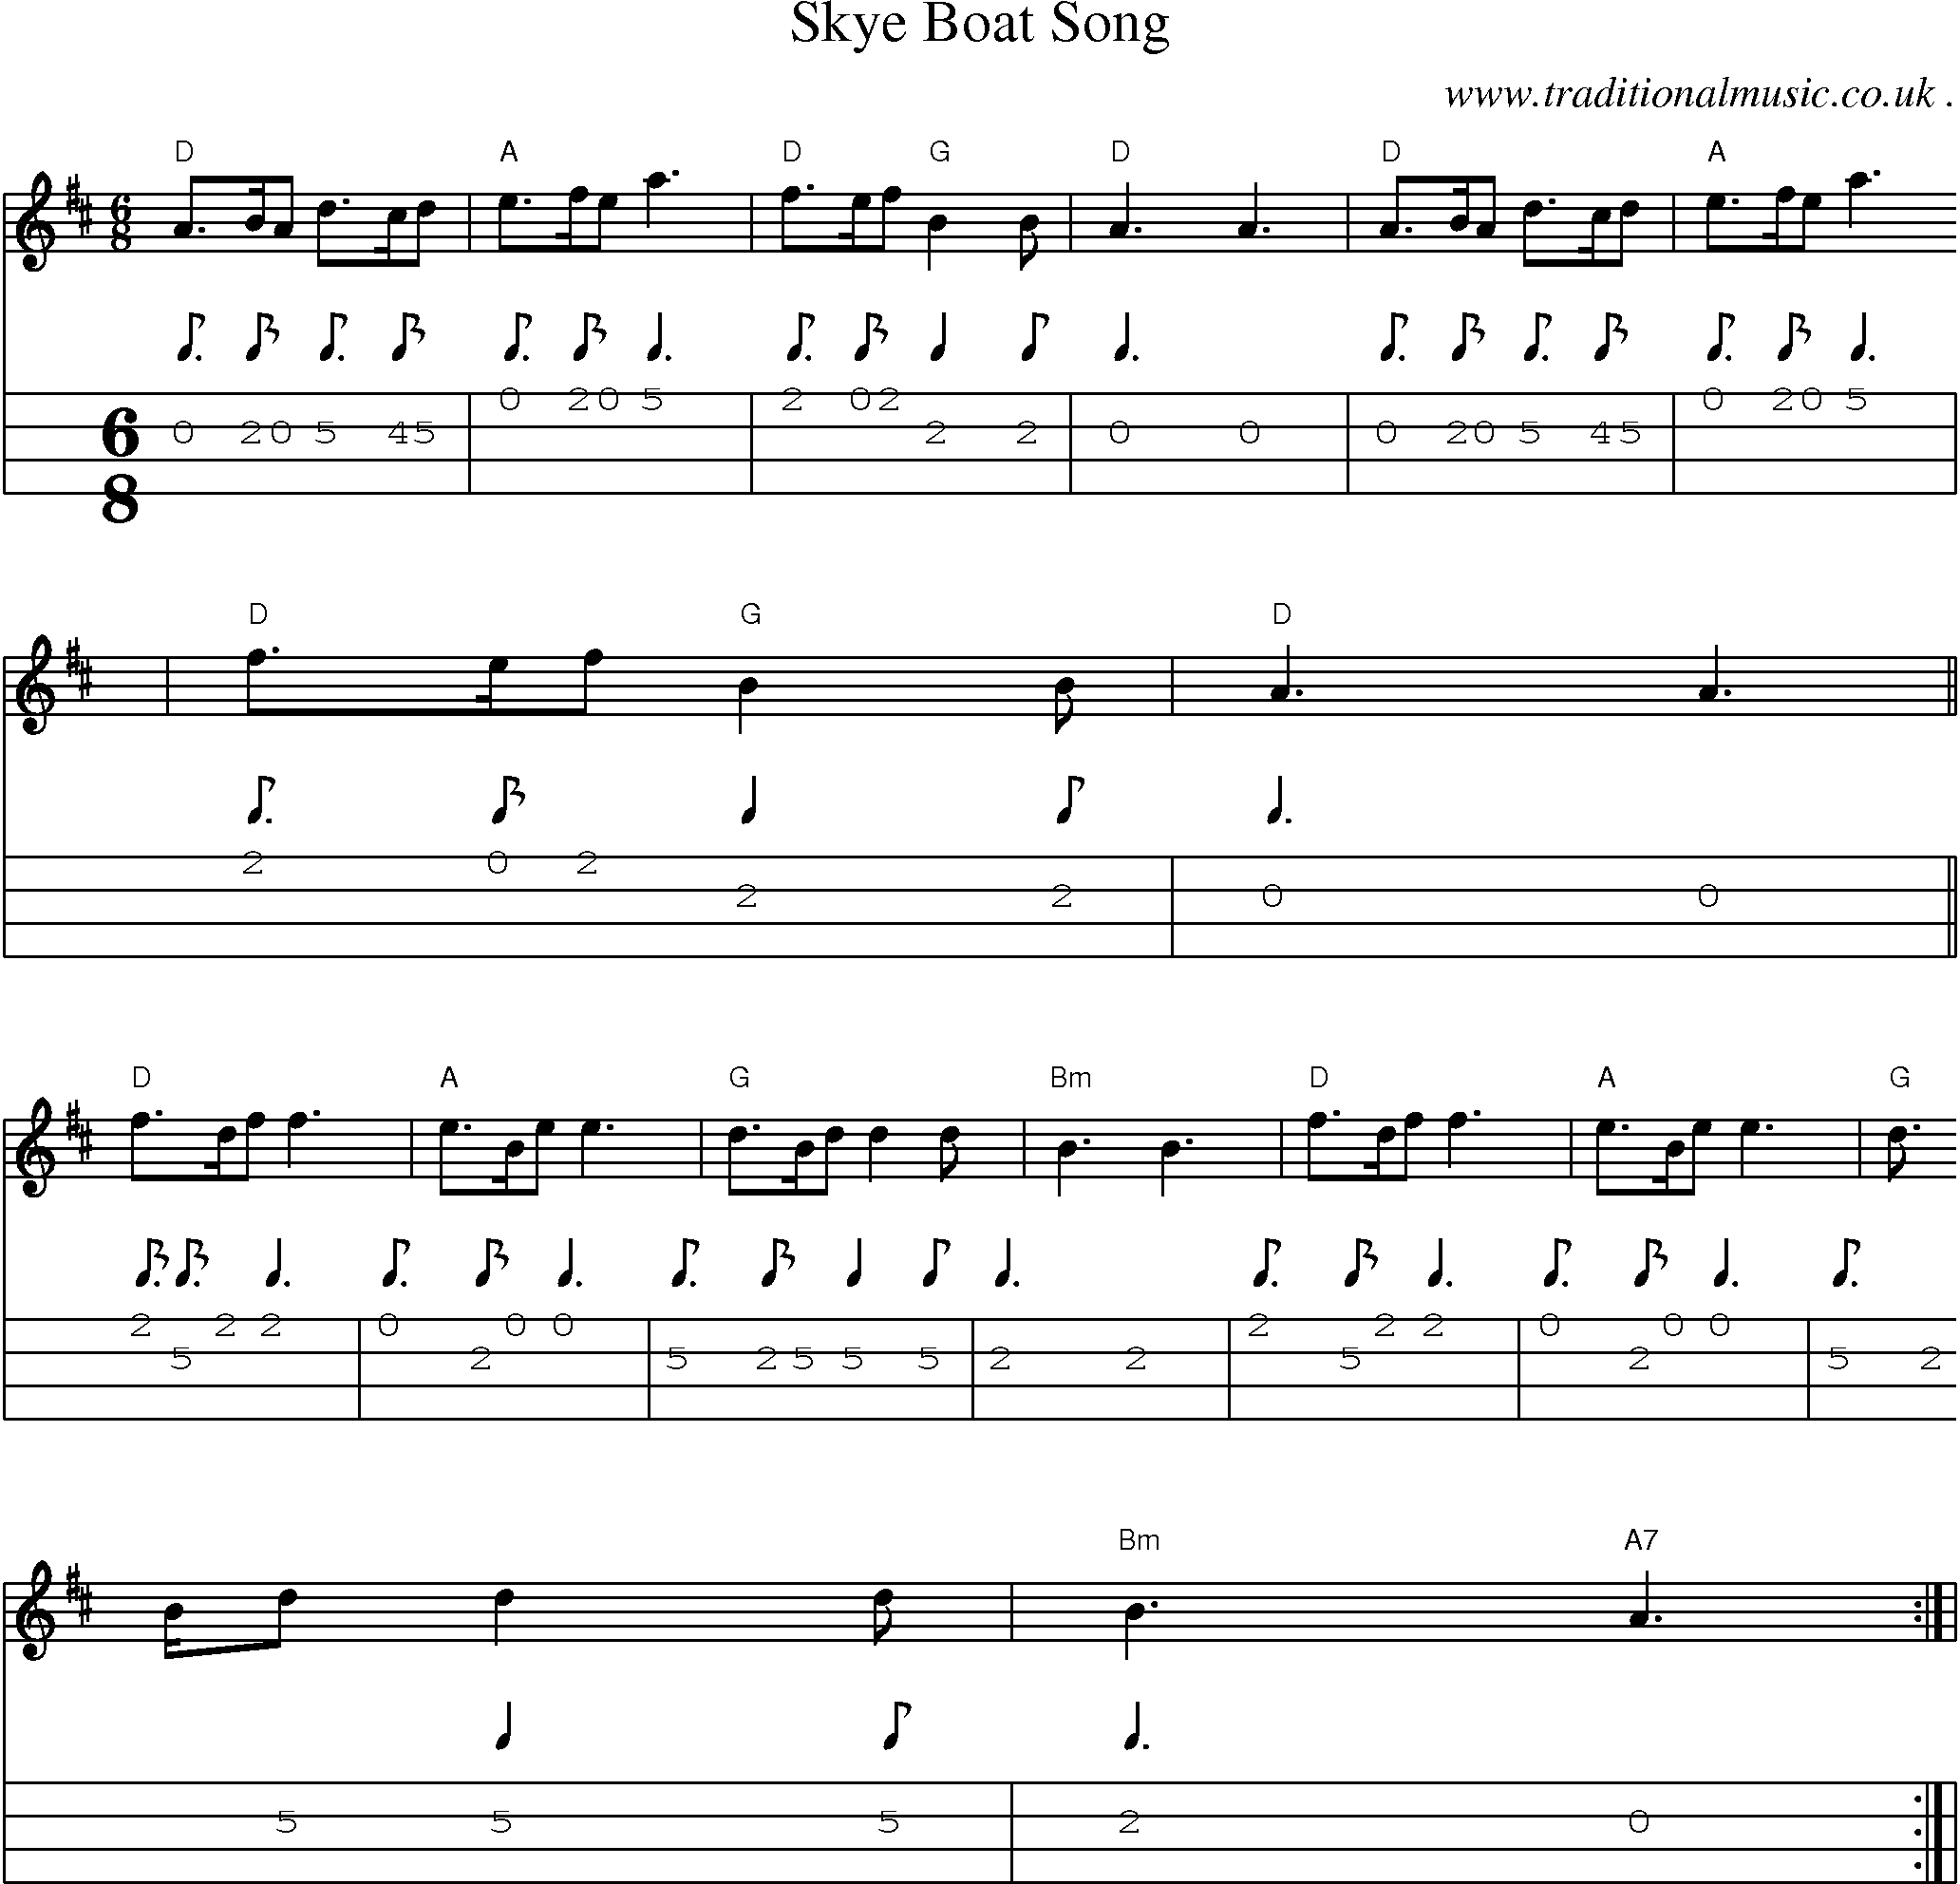 Sheet-music  score, Chords and Mandolin Tabs for Skye Boat Song